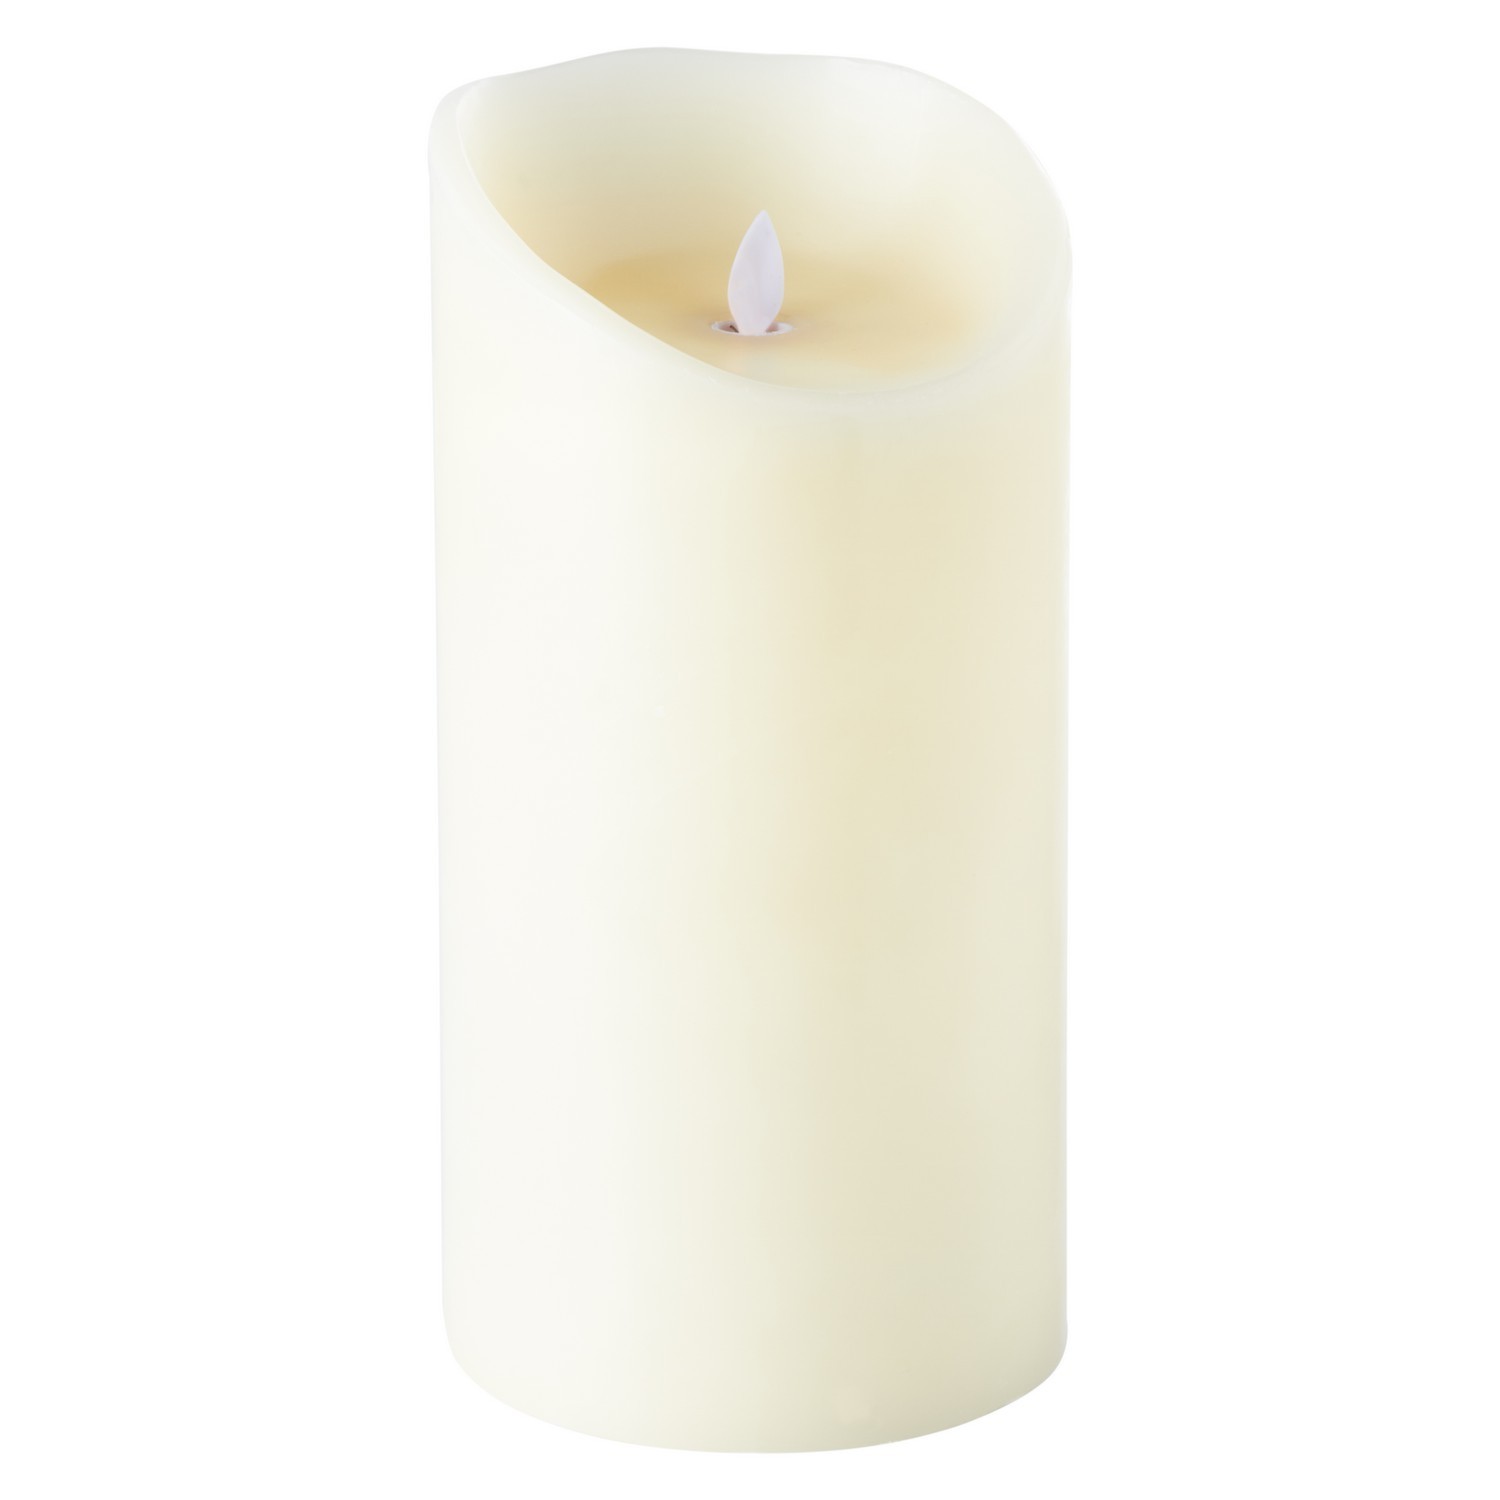 Neutral Flicker LED Candle 25 x 13cm Image